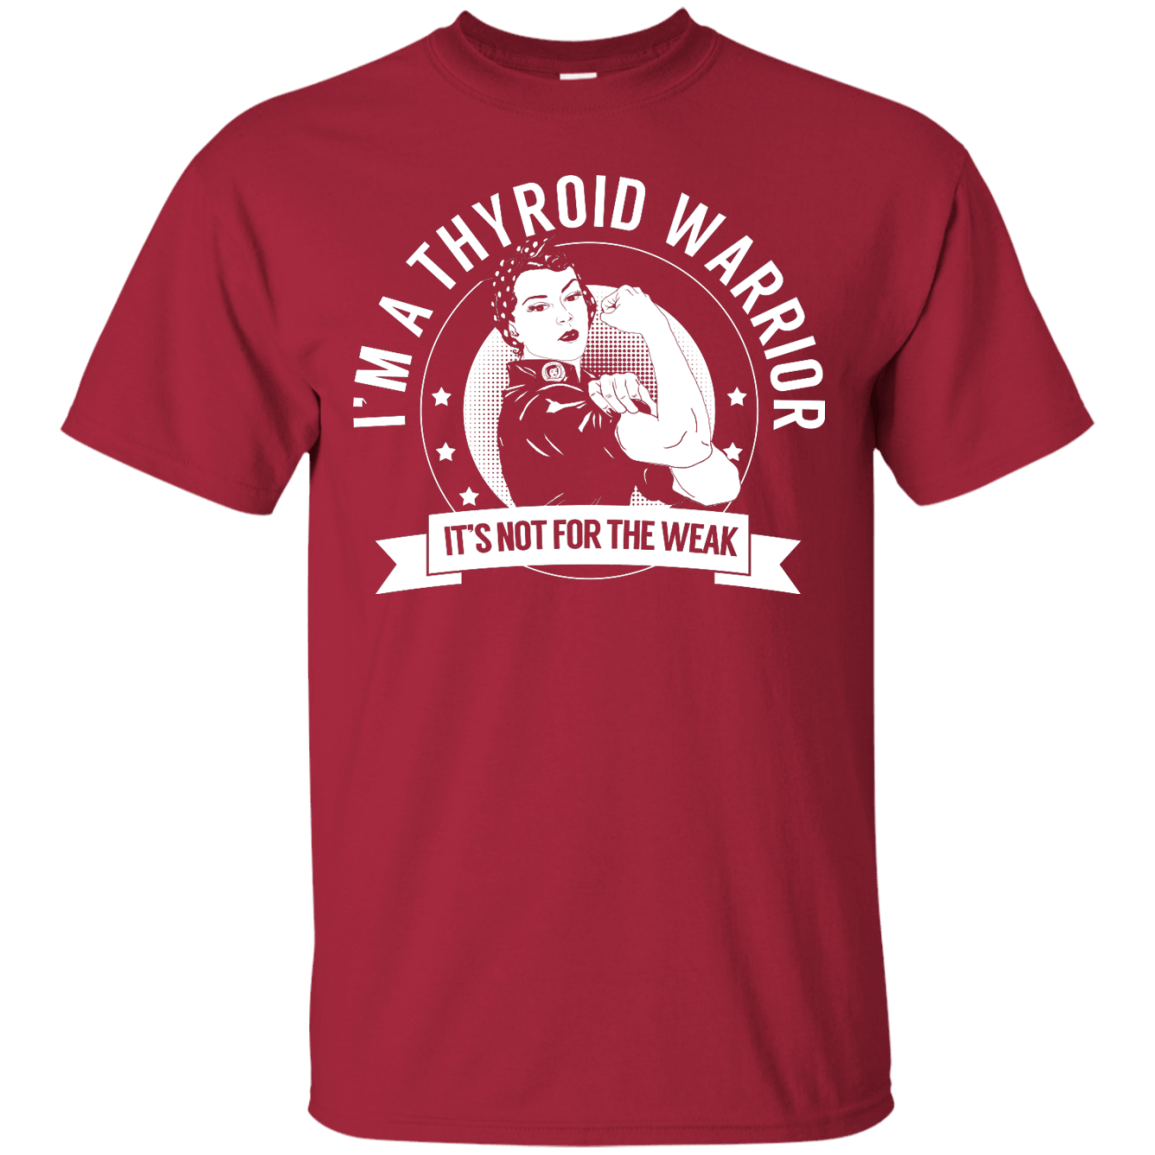 Thyroid Disease - Thyroid Warrior Not for the Weak Unisex Shirt - The Unchargeables